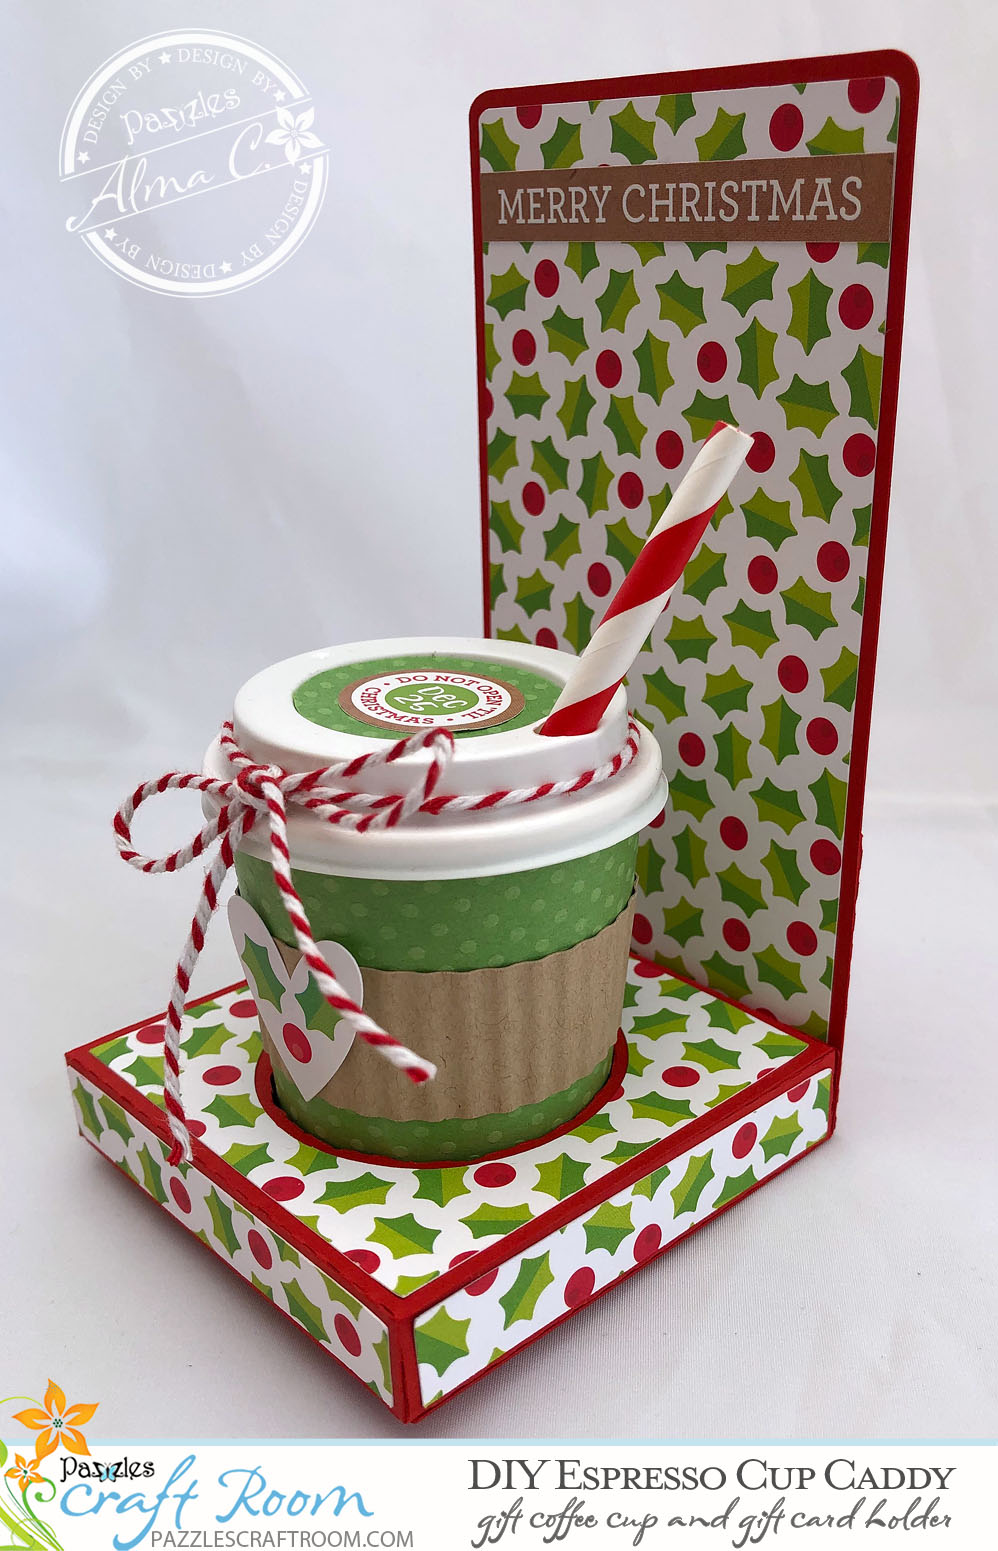 Pazzles DIY Espresso Cup Caddy with Gift Card makes a perfect Christmas Gift. Instant SVG download compatible with all major electronic cutters including Pazzles Inspiration, Cricut, and Silhouette Cameo. Design by Alma Cervantes